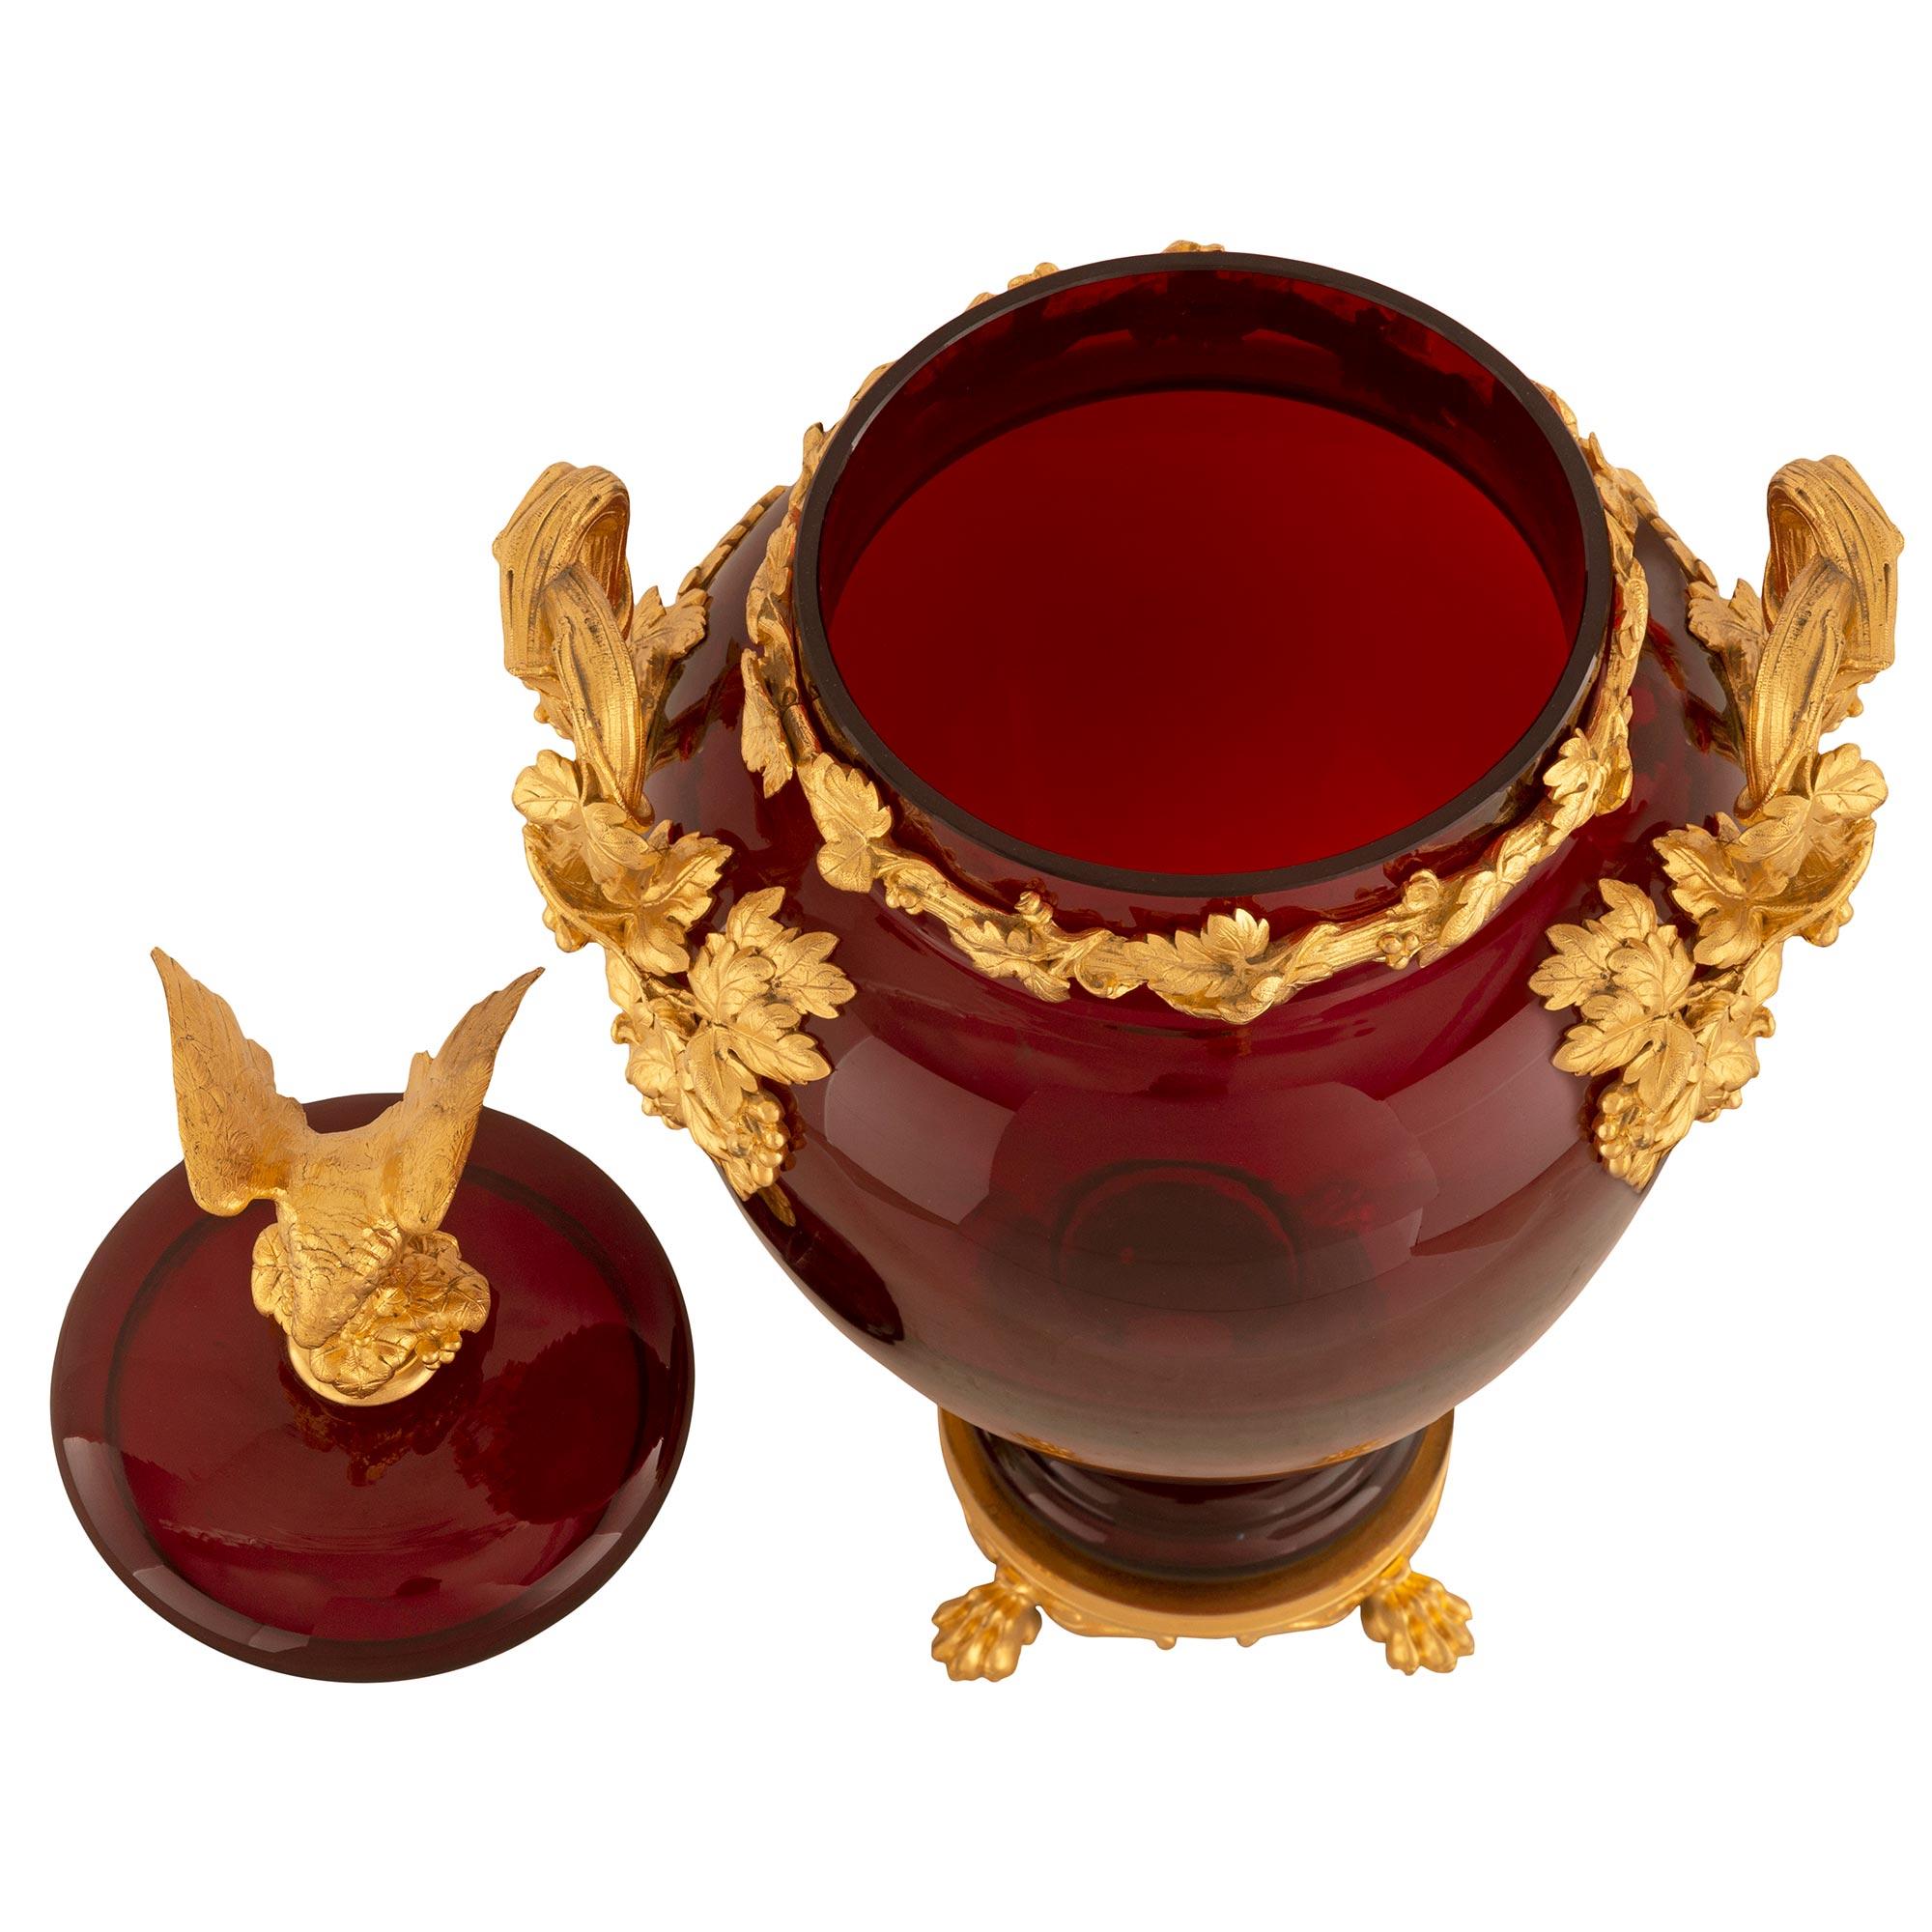 A stunning French 19th century Neo-Classical st. oxblood red glass and ormolu lidded urn. The urn is raised by a circular base with handsome ormolu paw feet amidst scrolled and fluted and hammered designs below the mottled socle shaped pedestal